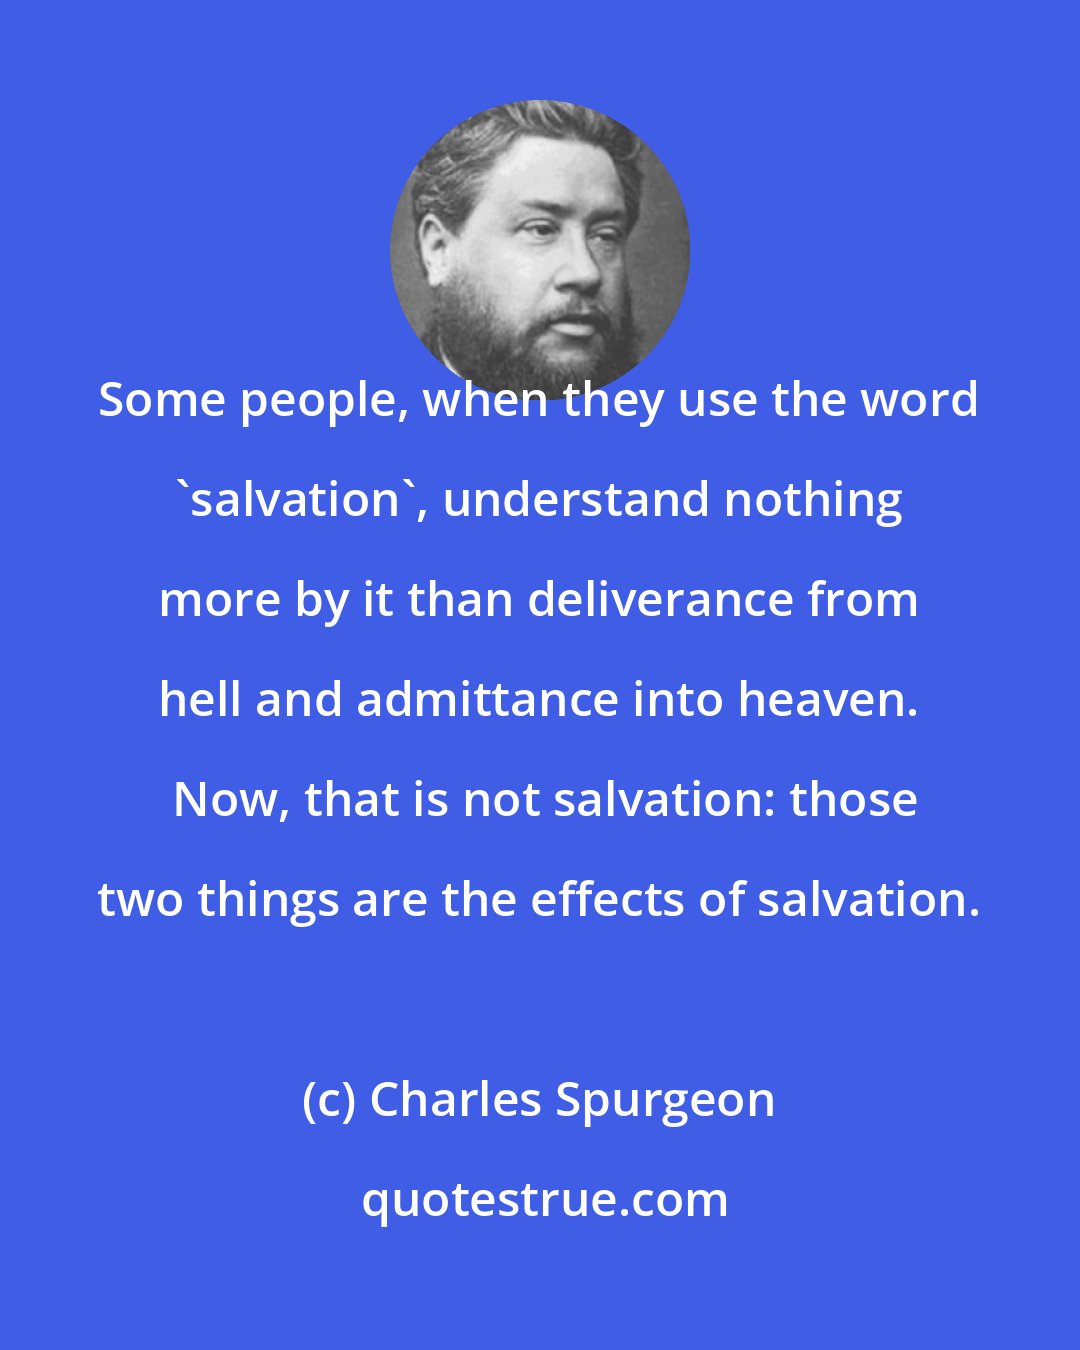 Charles Spurgeon: Some people, when they use the word 'salvation', understand nothing more by it than deliverance from hell and admittance into heaven.  Now, that is not salvation: those two things are the effects of salvation.